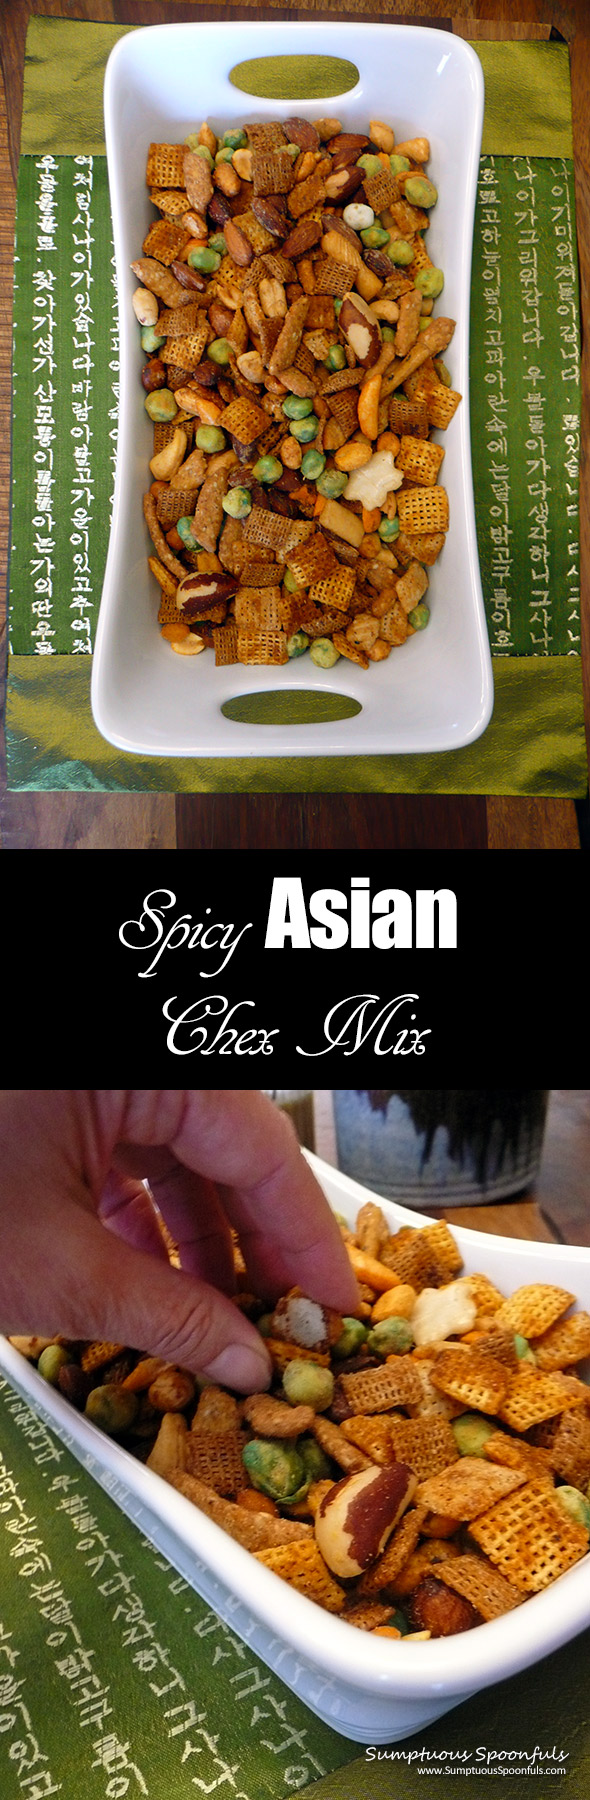 Spicy Asian Chex Mix ~ Sumptuous Spoonfuls #Asian #hot #snack #mix #recipe